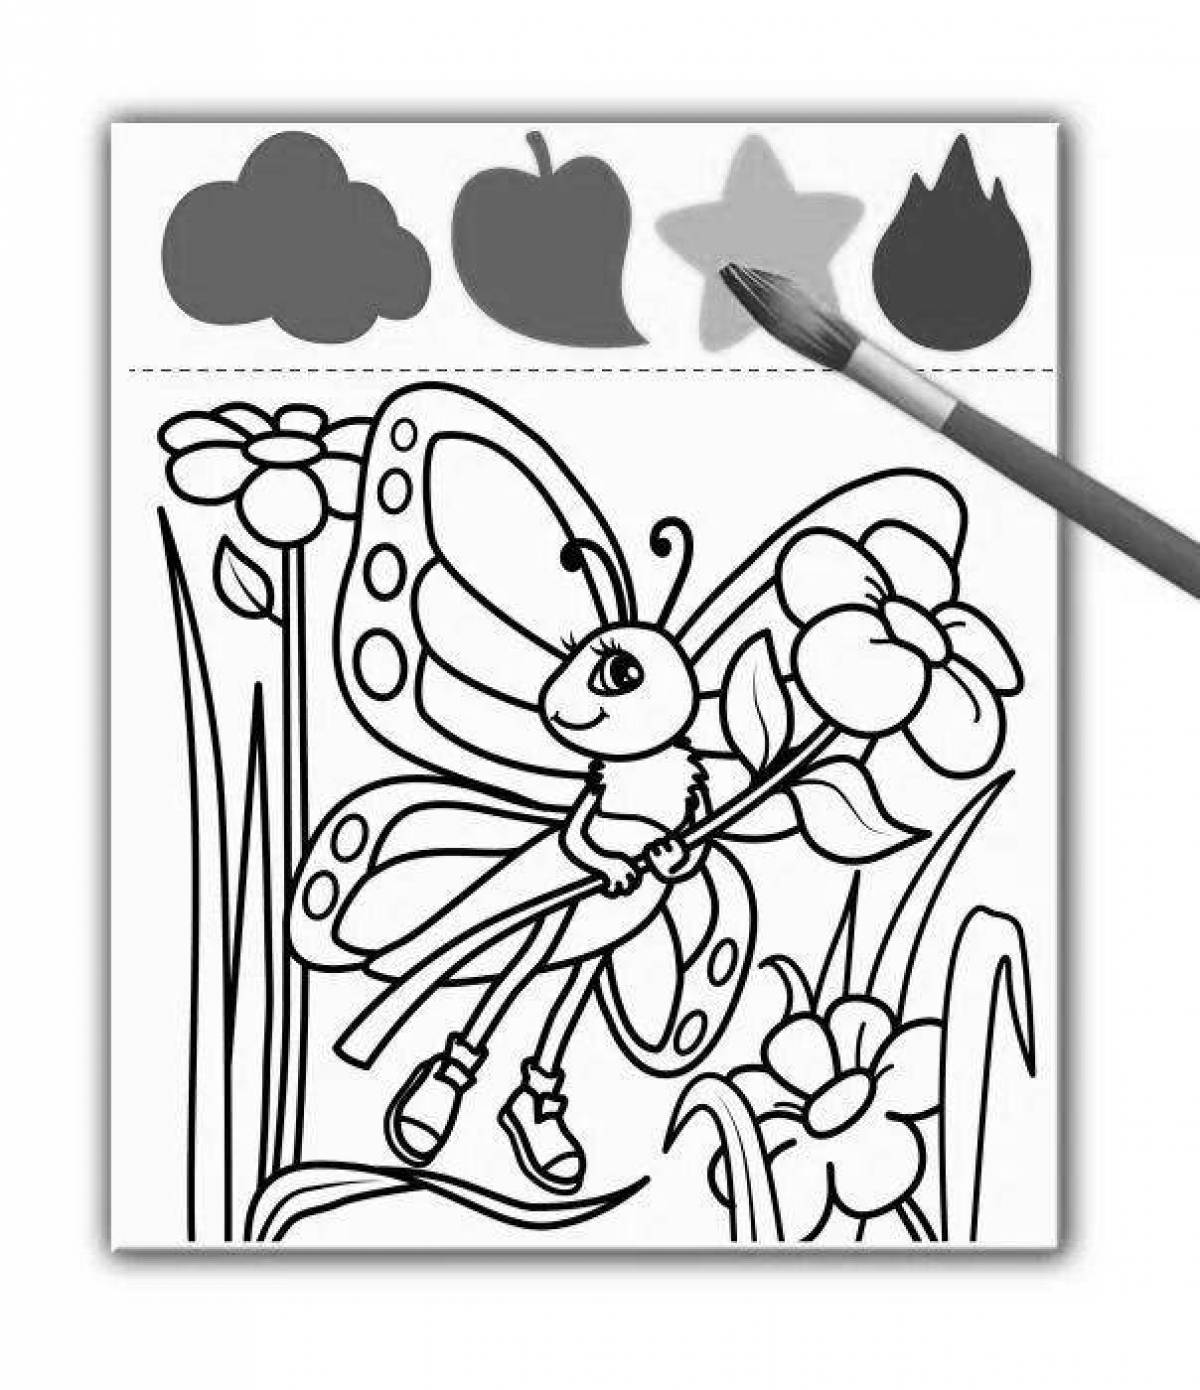 Splash can coloring page